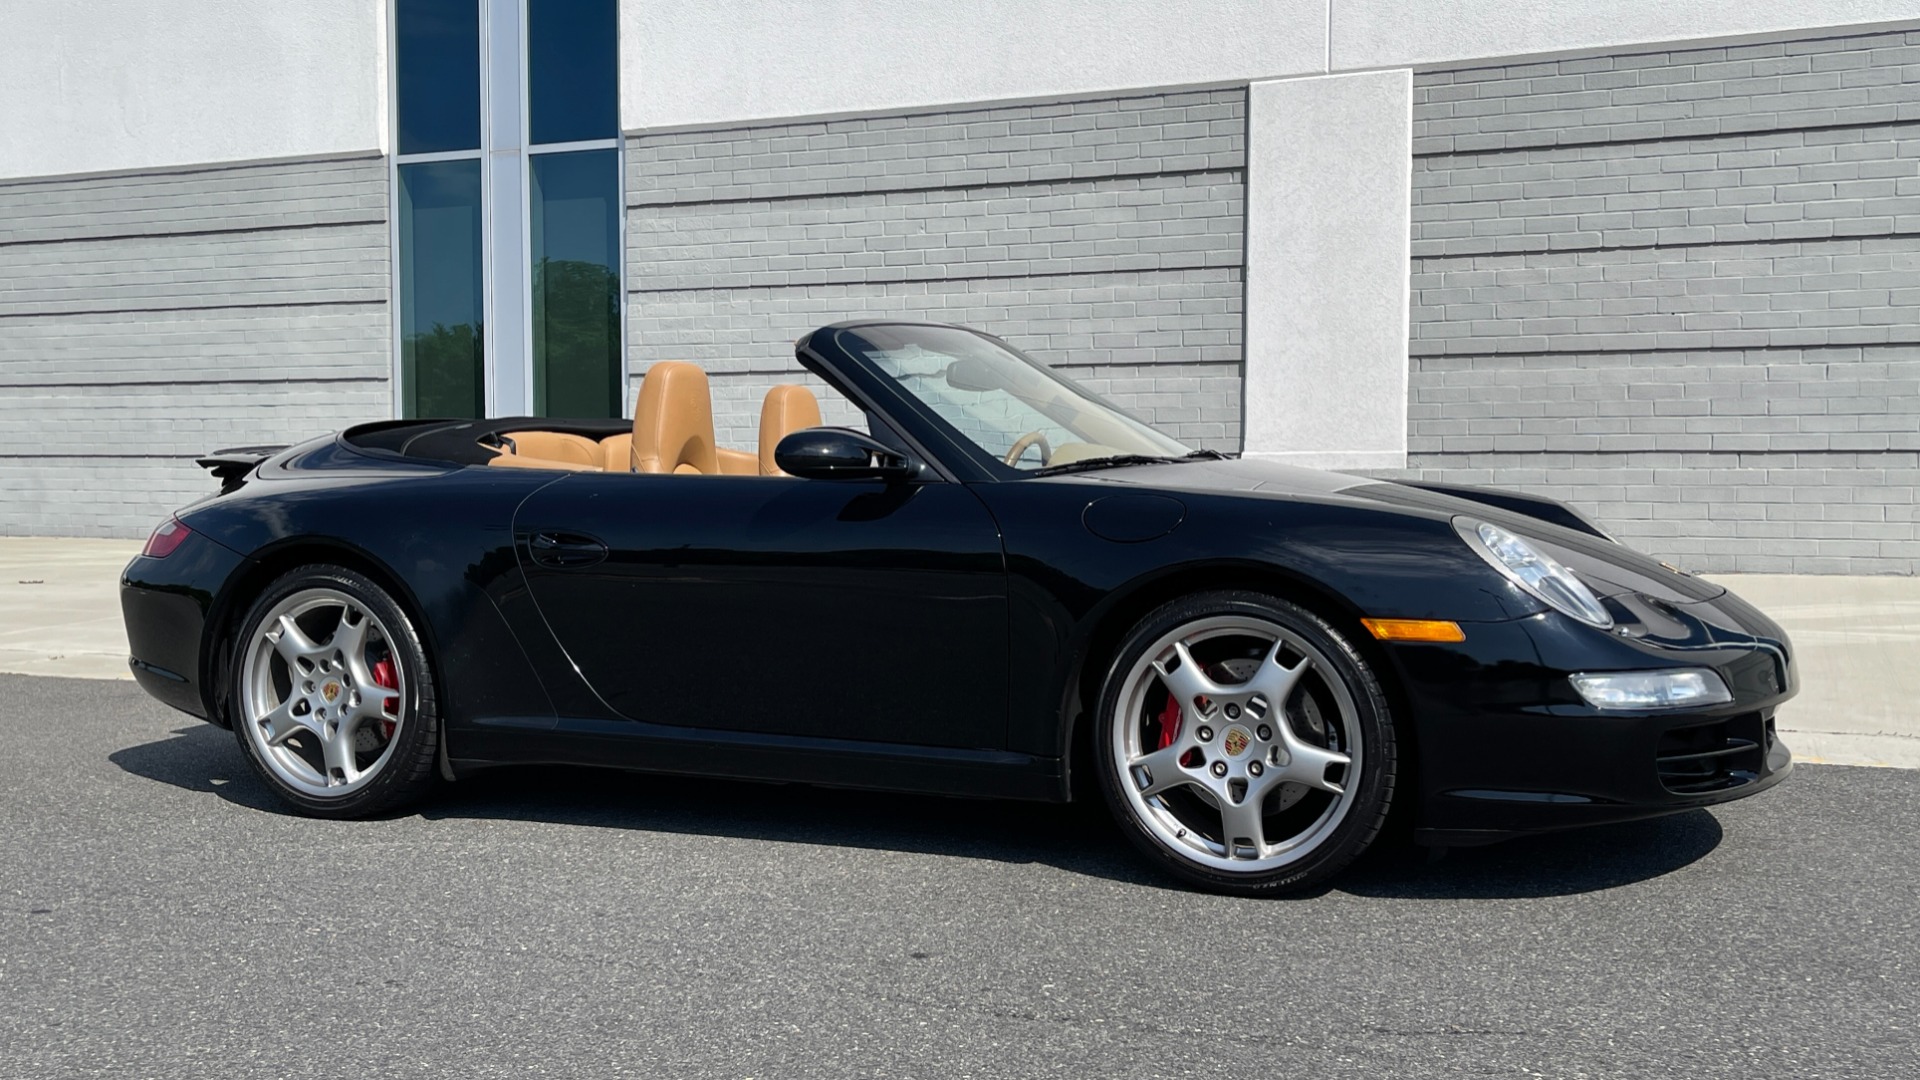 Used 2006 Porsche 911 CARRERA S CABRIOLET / BOSE / CD CHANGER / PWR SEAT PKG / HTD STS for sale $56,400 at Formula Imports in Charlotte NC 28227 2